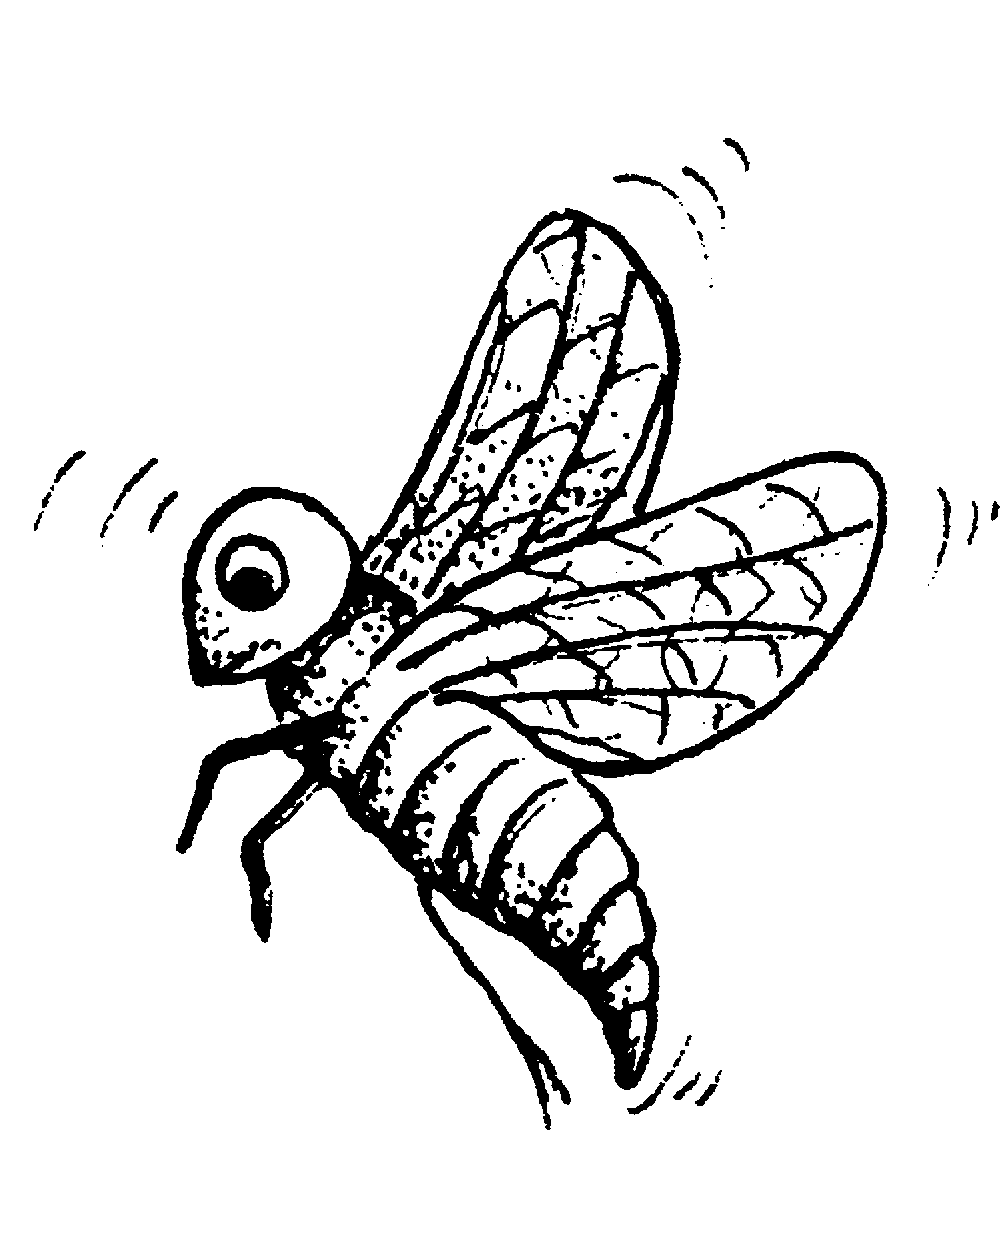 Insects coloring page to print and color